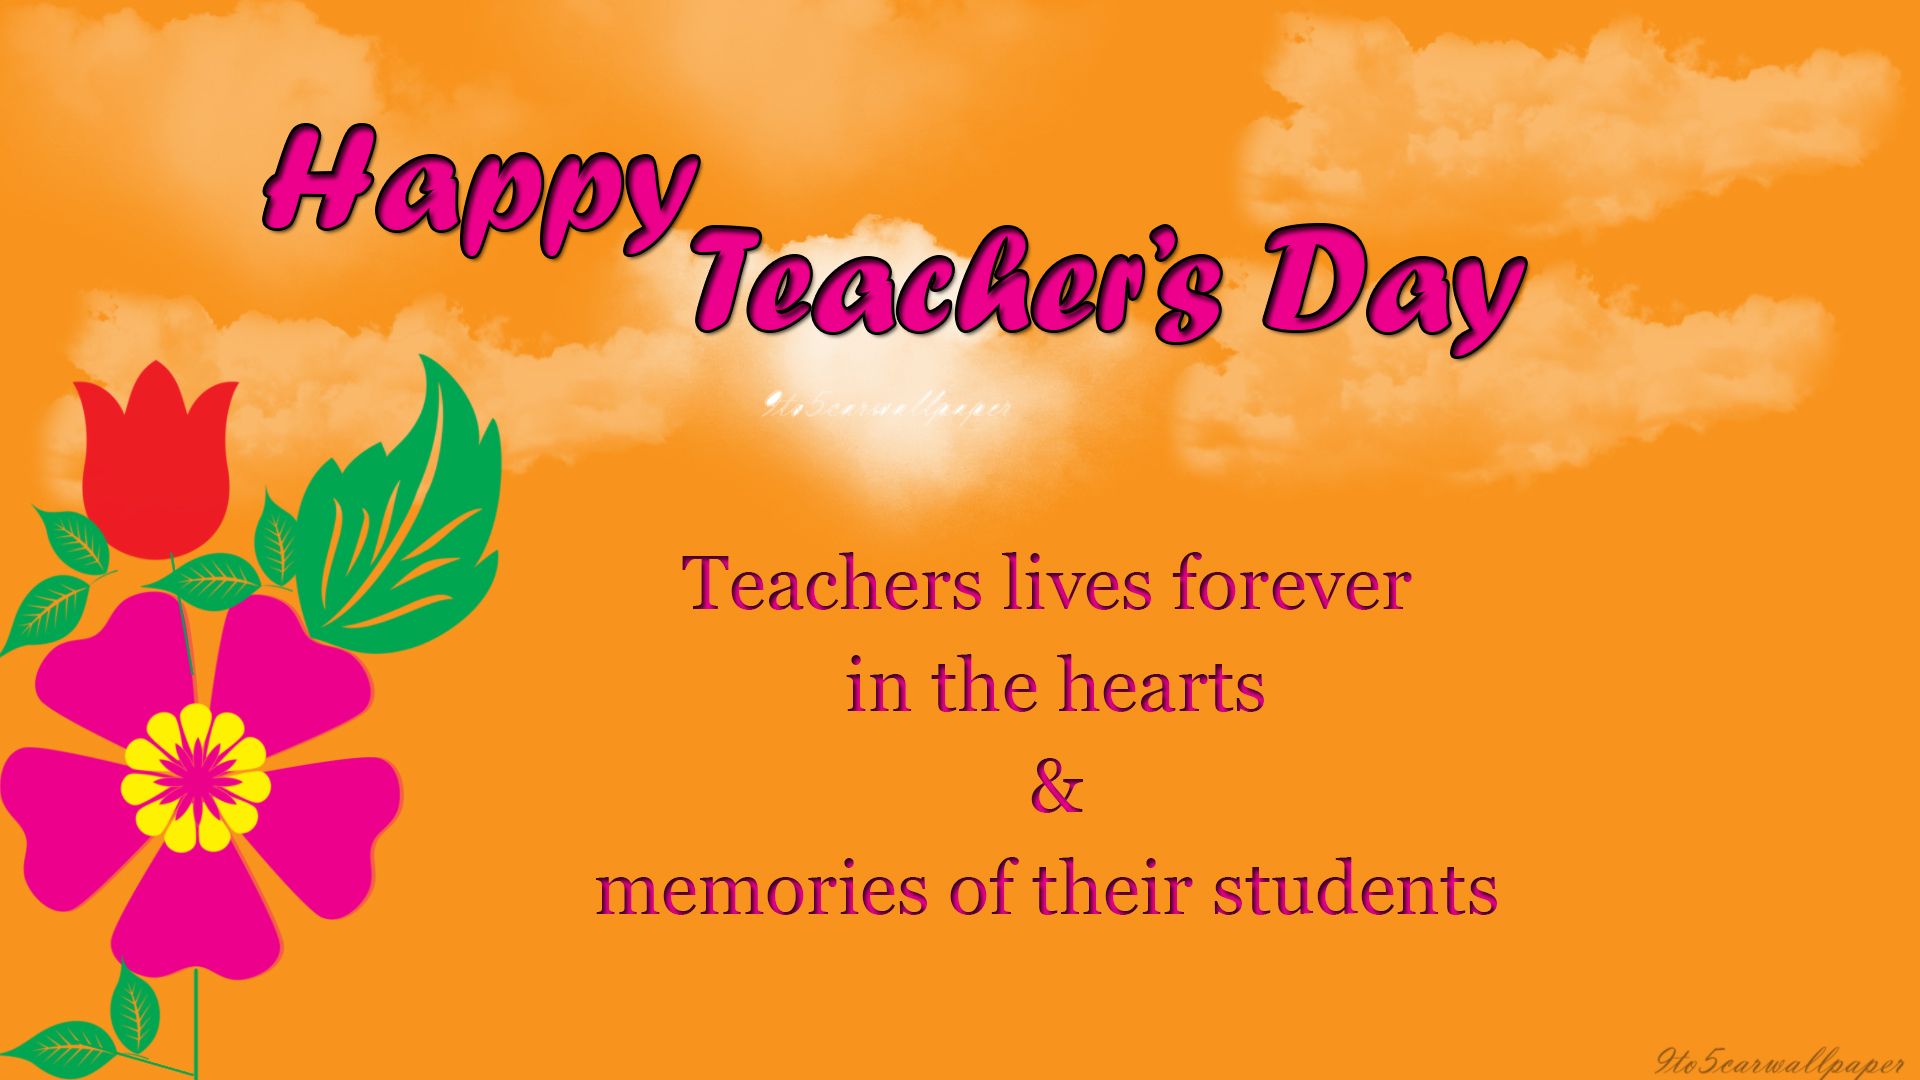 happy-teachers-day-posters-wallpapers-wishes-cards-images-2017